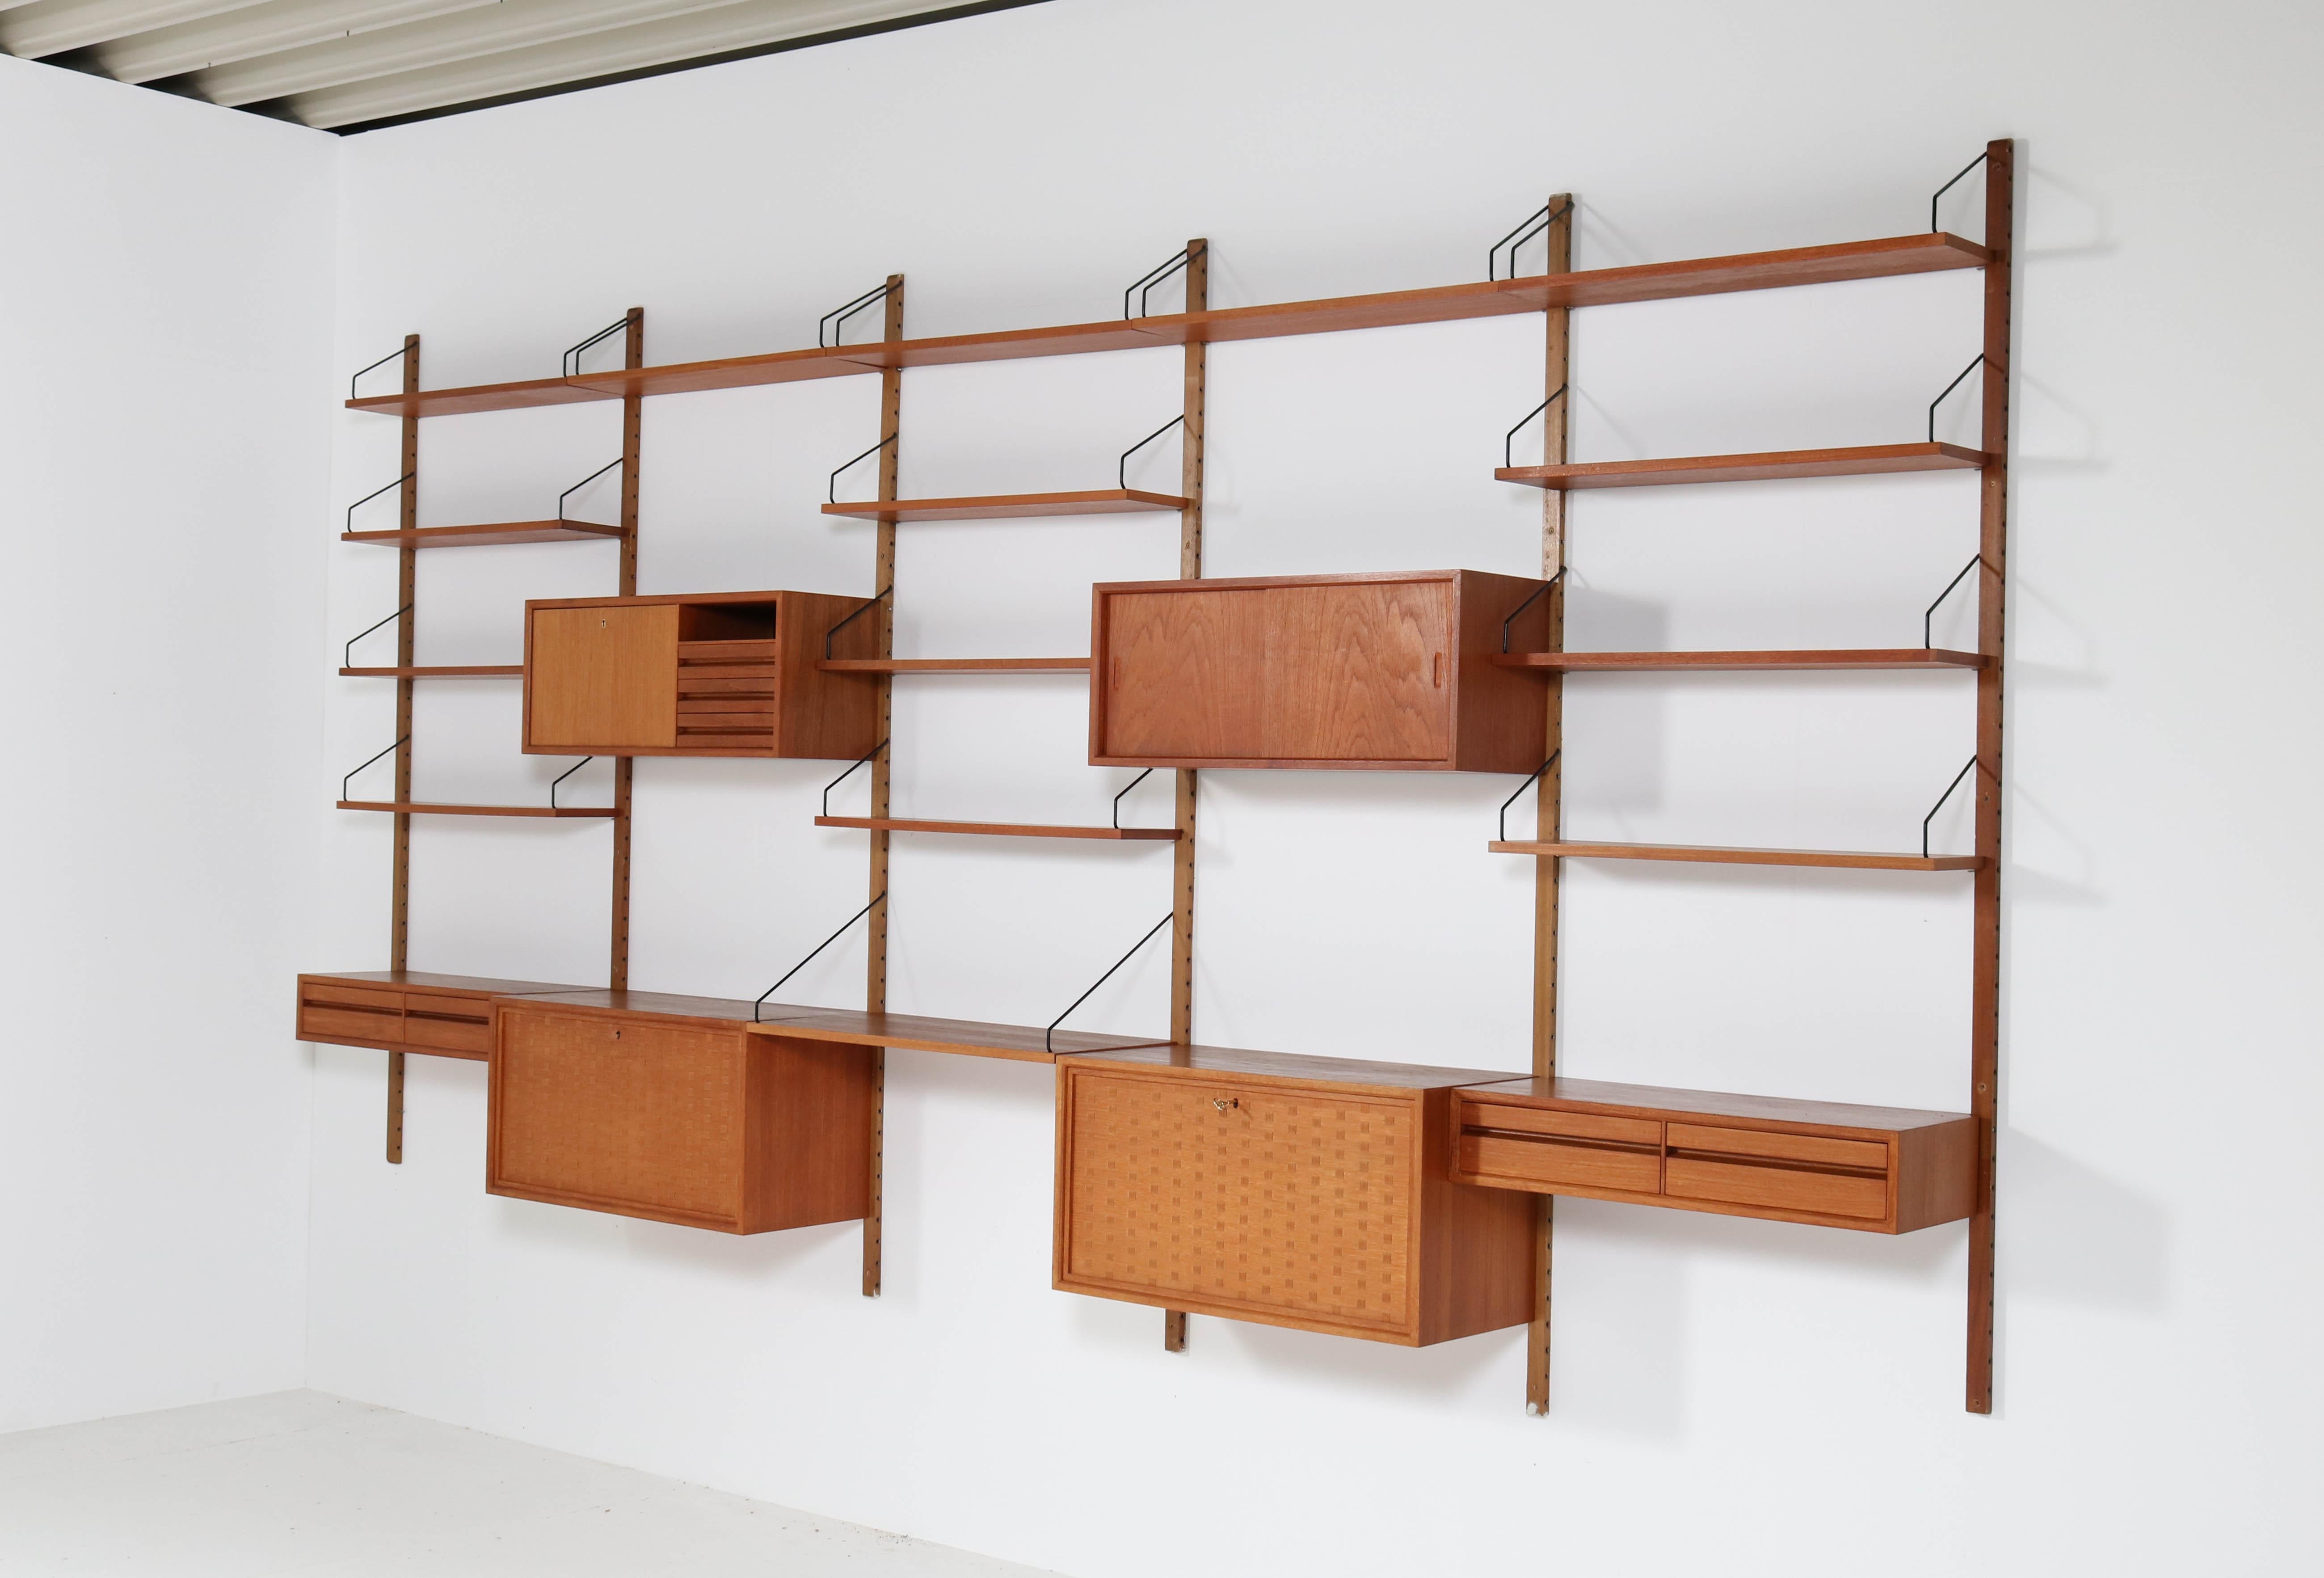 Magnificent extra large Mid-Century Modern teak modular wall unit.
Design by Poul Cadovius for Cado.
Striking Danish design from the sixties.
This wall unit consists of:
6 uprights: H:210 cm or 82.68 in.
2 cabinets with drop-leaf doors: 42 cm